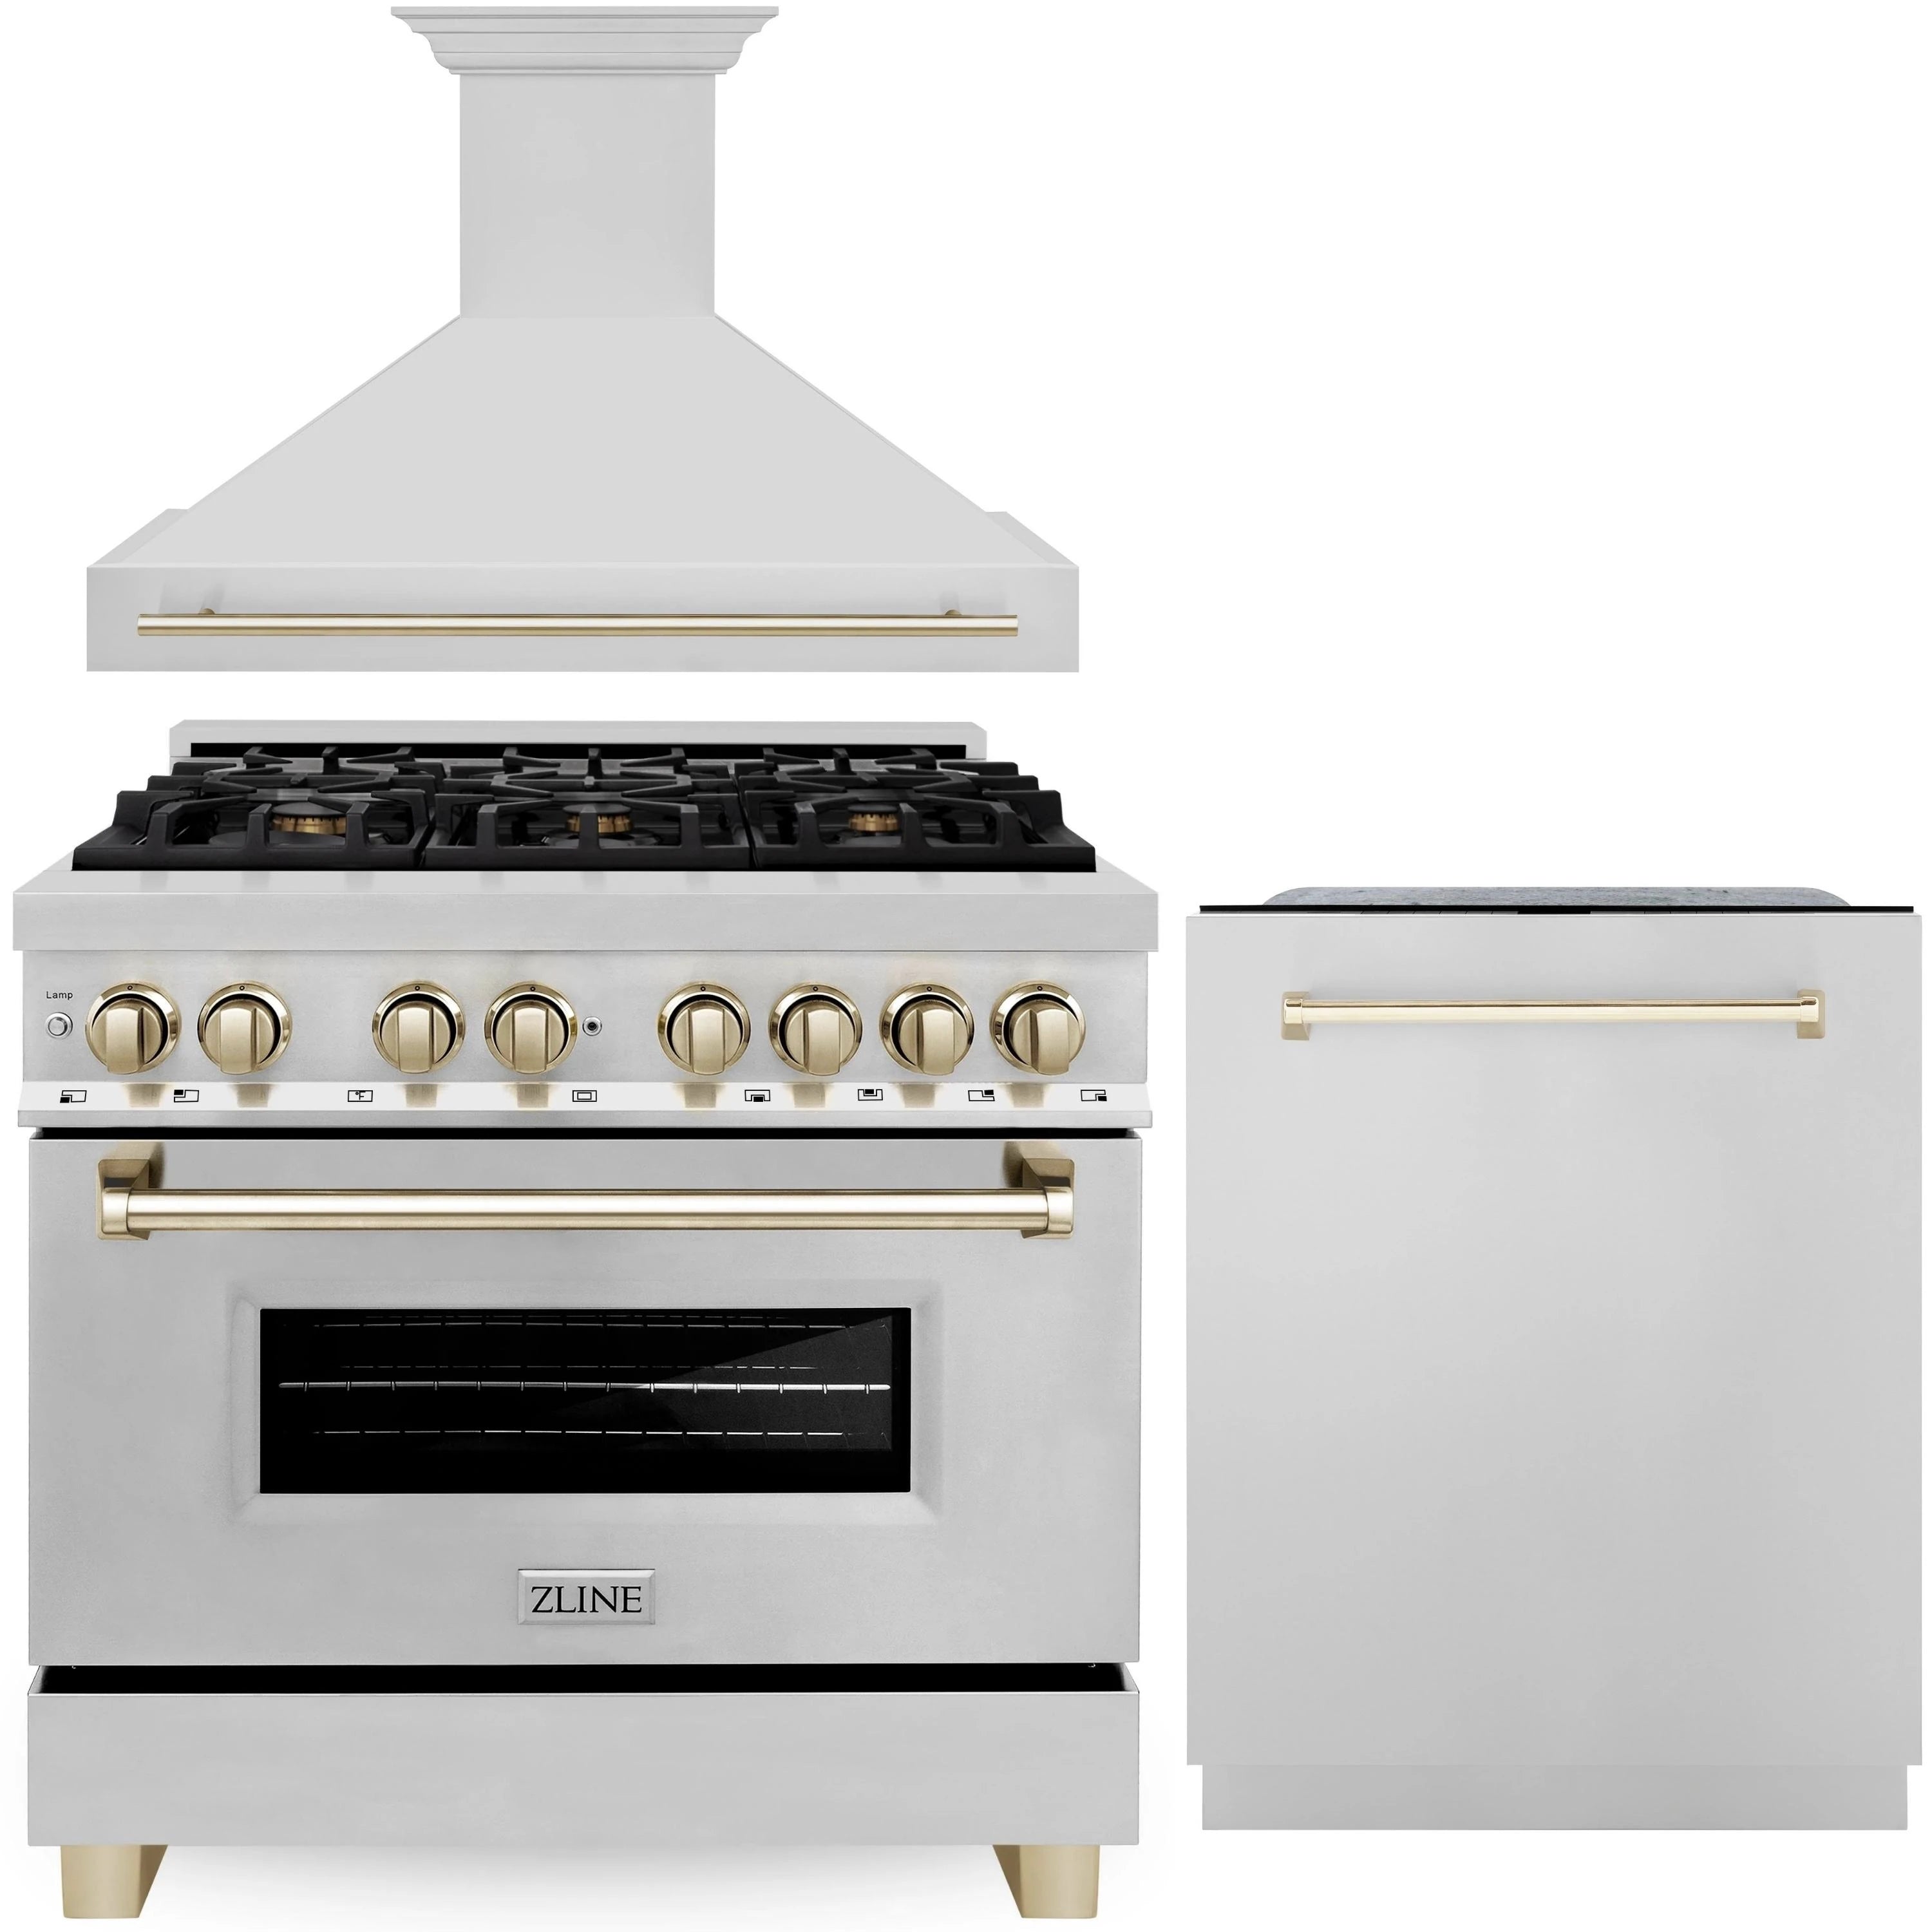 ZLINE Autograph Edition 3-Piece Appliance Package - 36-Inch Dual Fuel Range, Wall Mounted Range Hood, & 24-Inch Tall Tub Dishwasher in Stainless Steel with Gold Trim (3AKP-RARHDWM36-G)